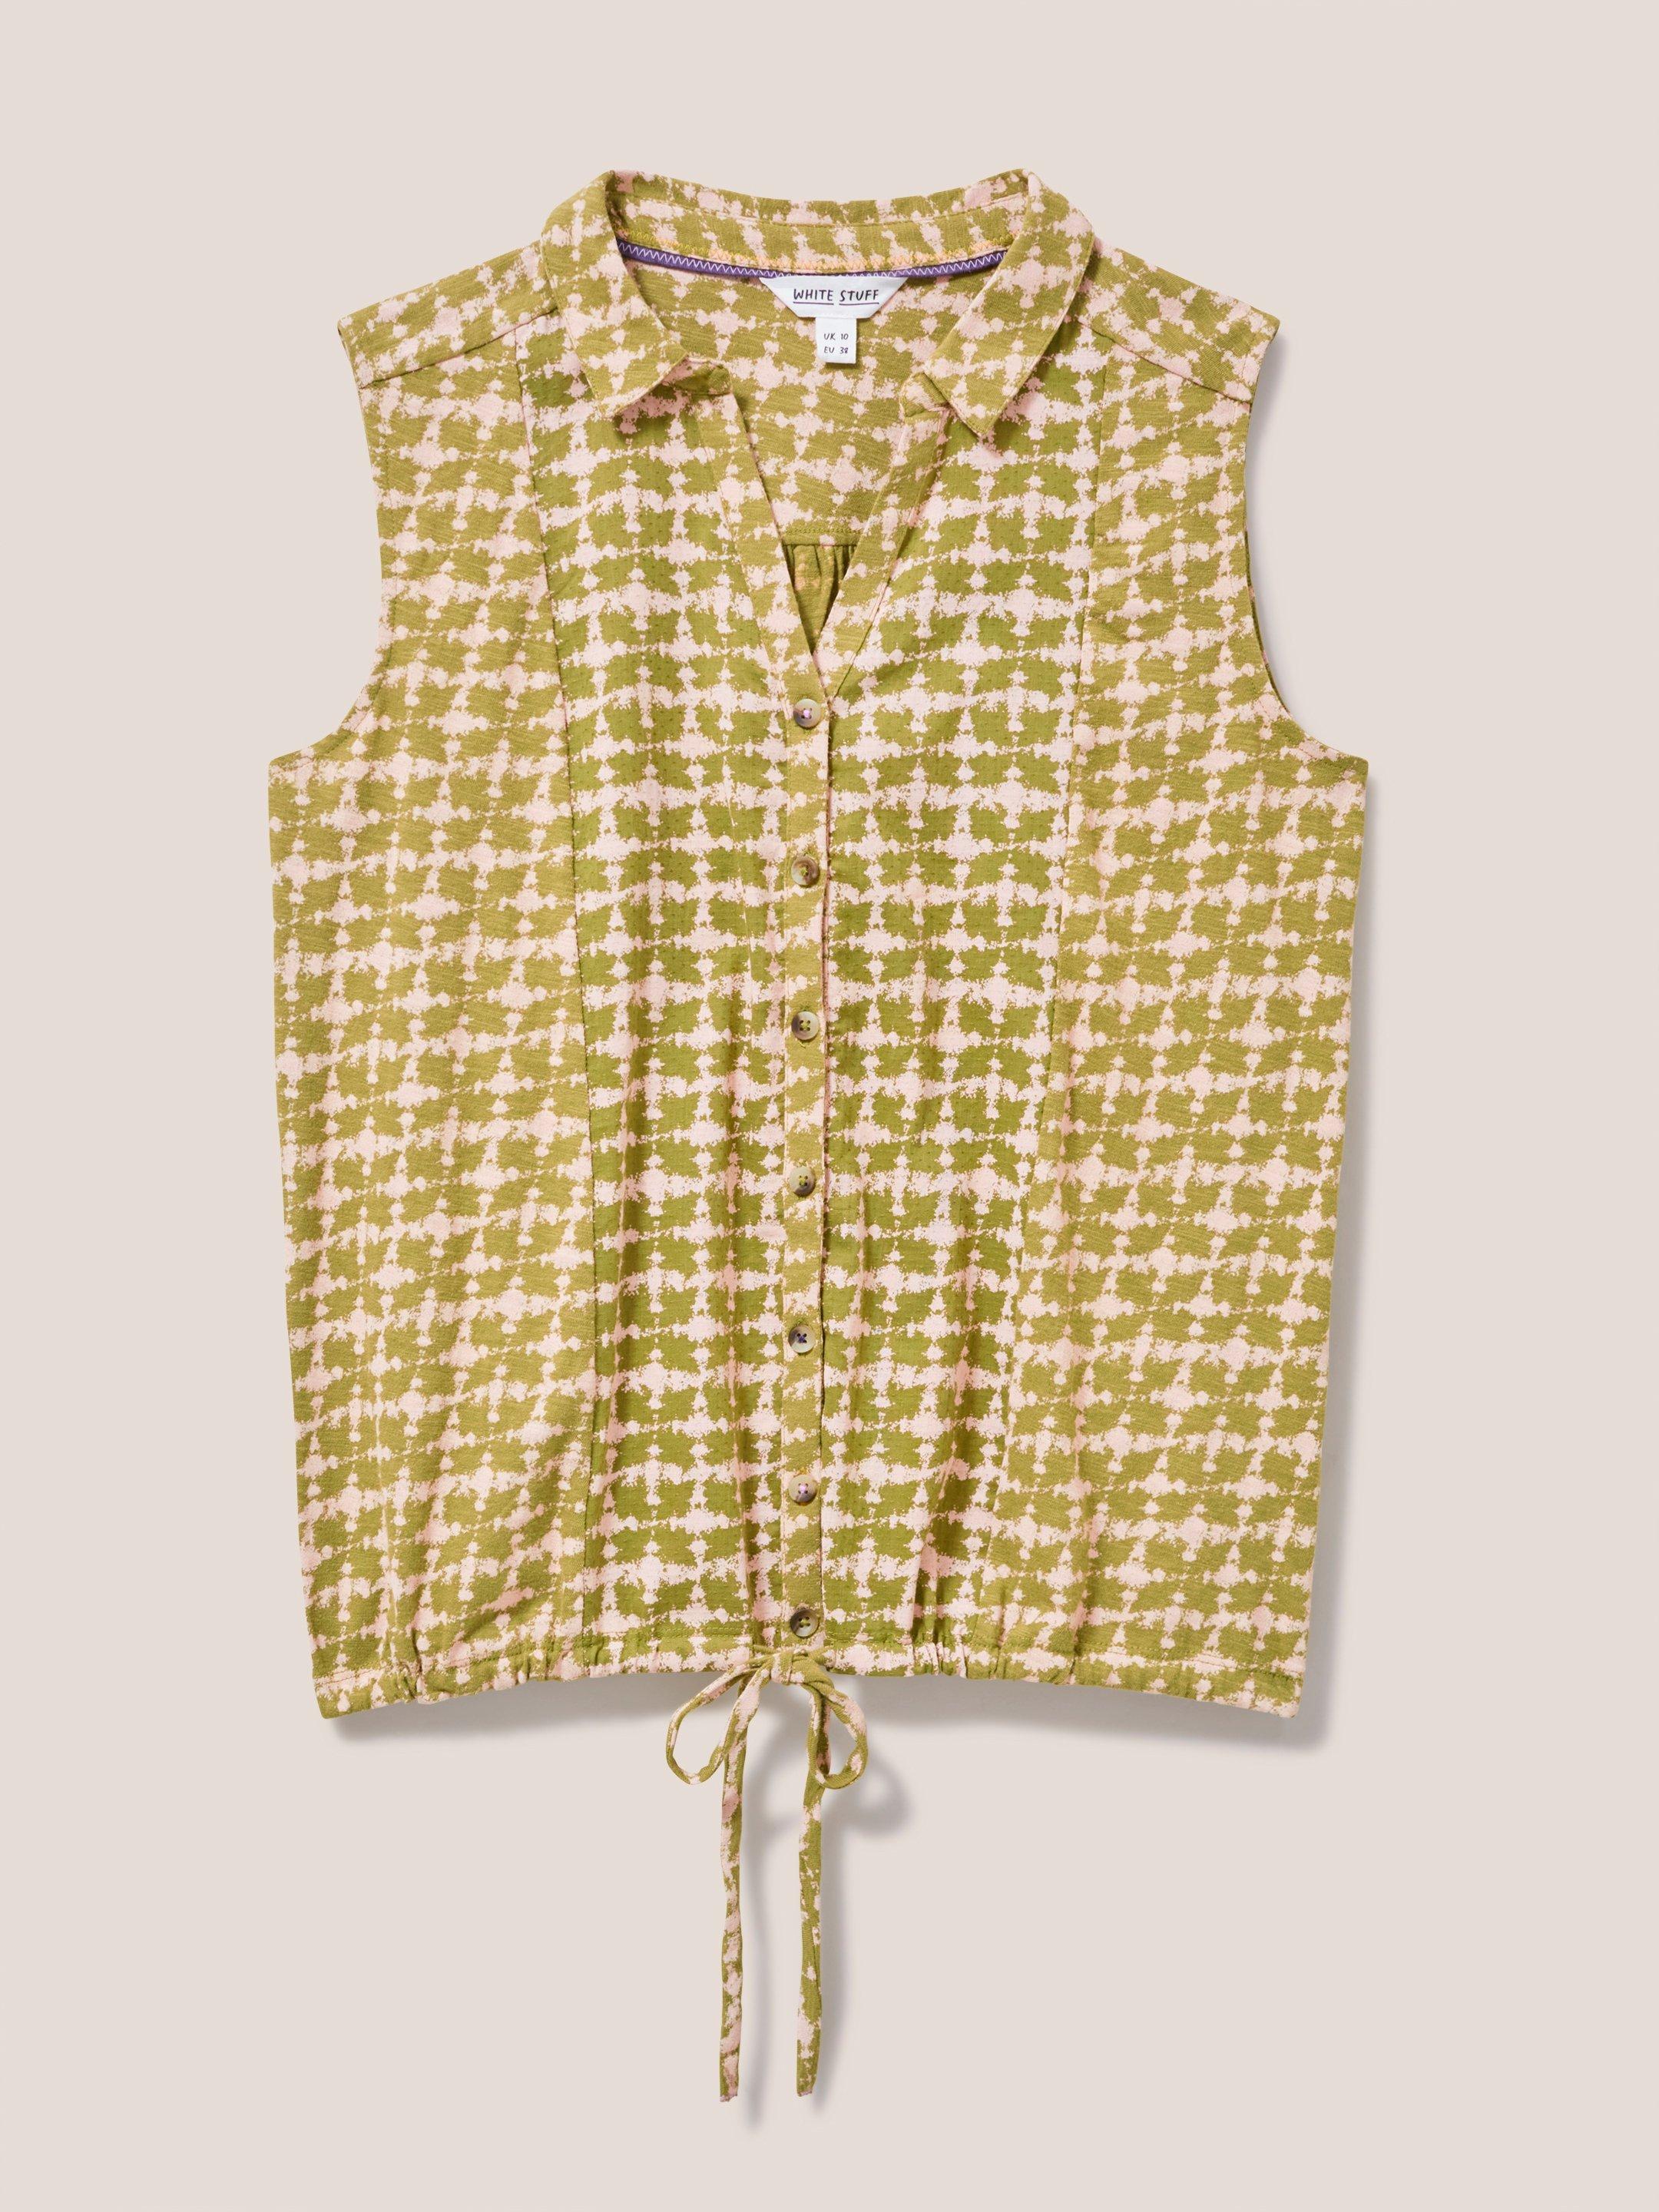 FLOWING GRASSES JERSEY SHIRT in GREEN PR - FLAT FRONT